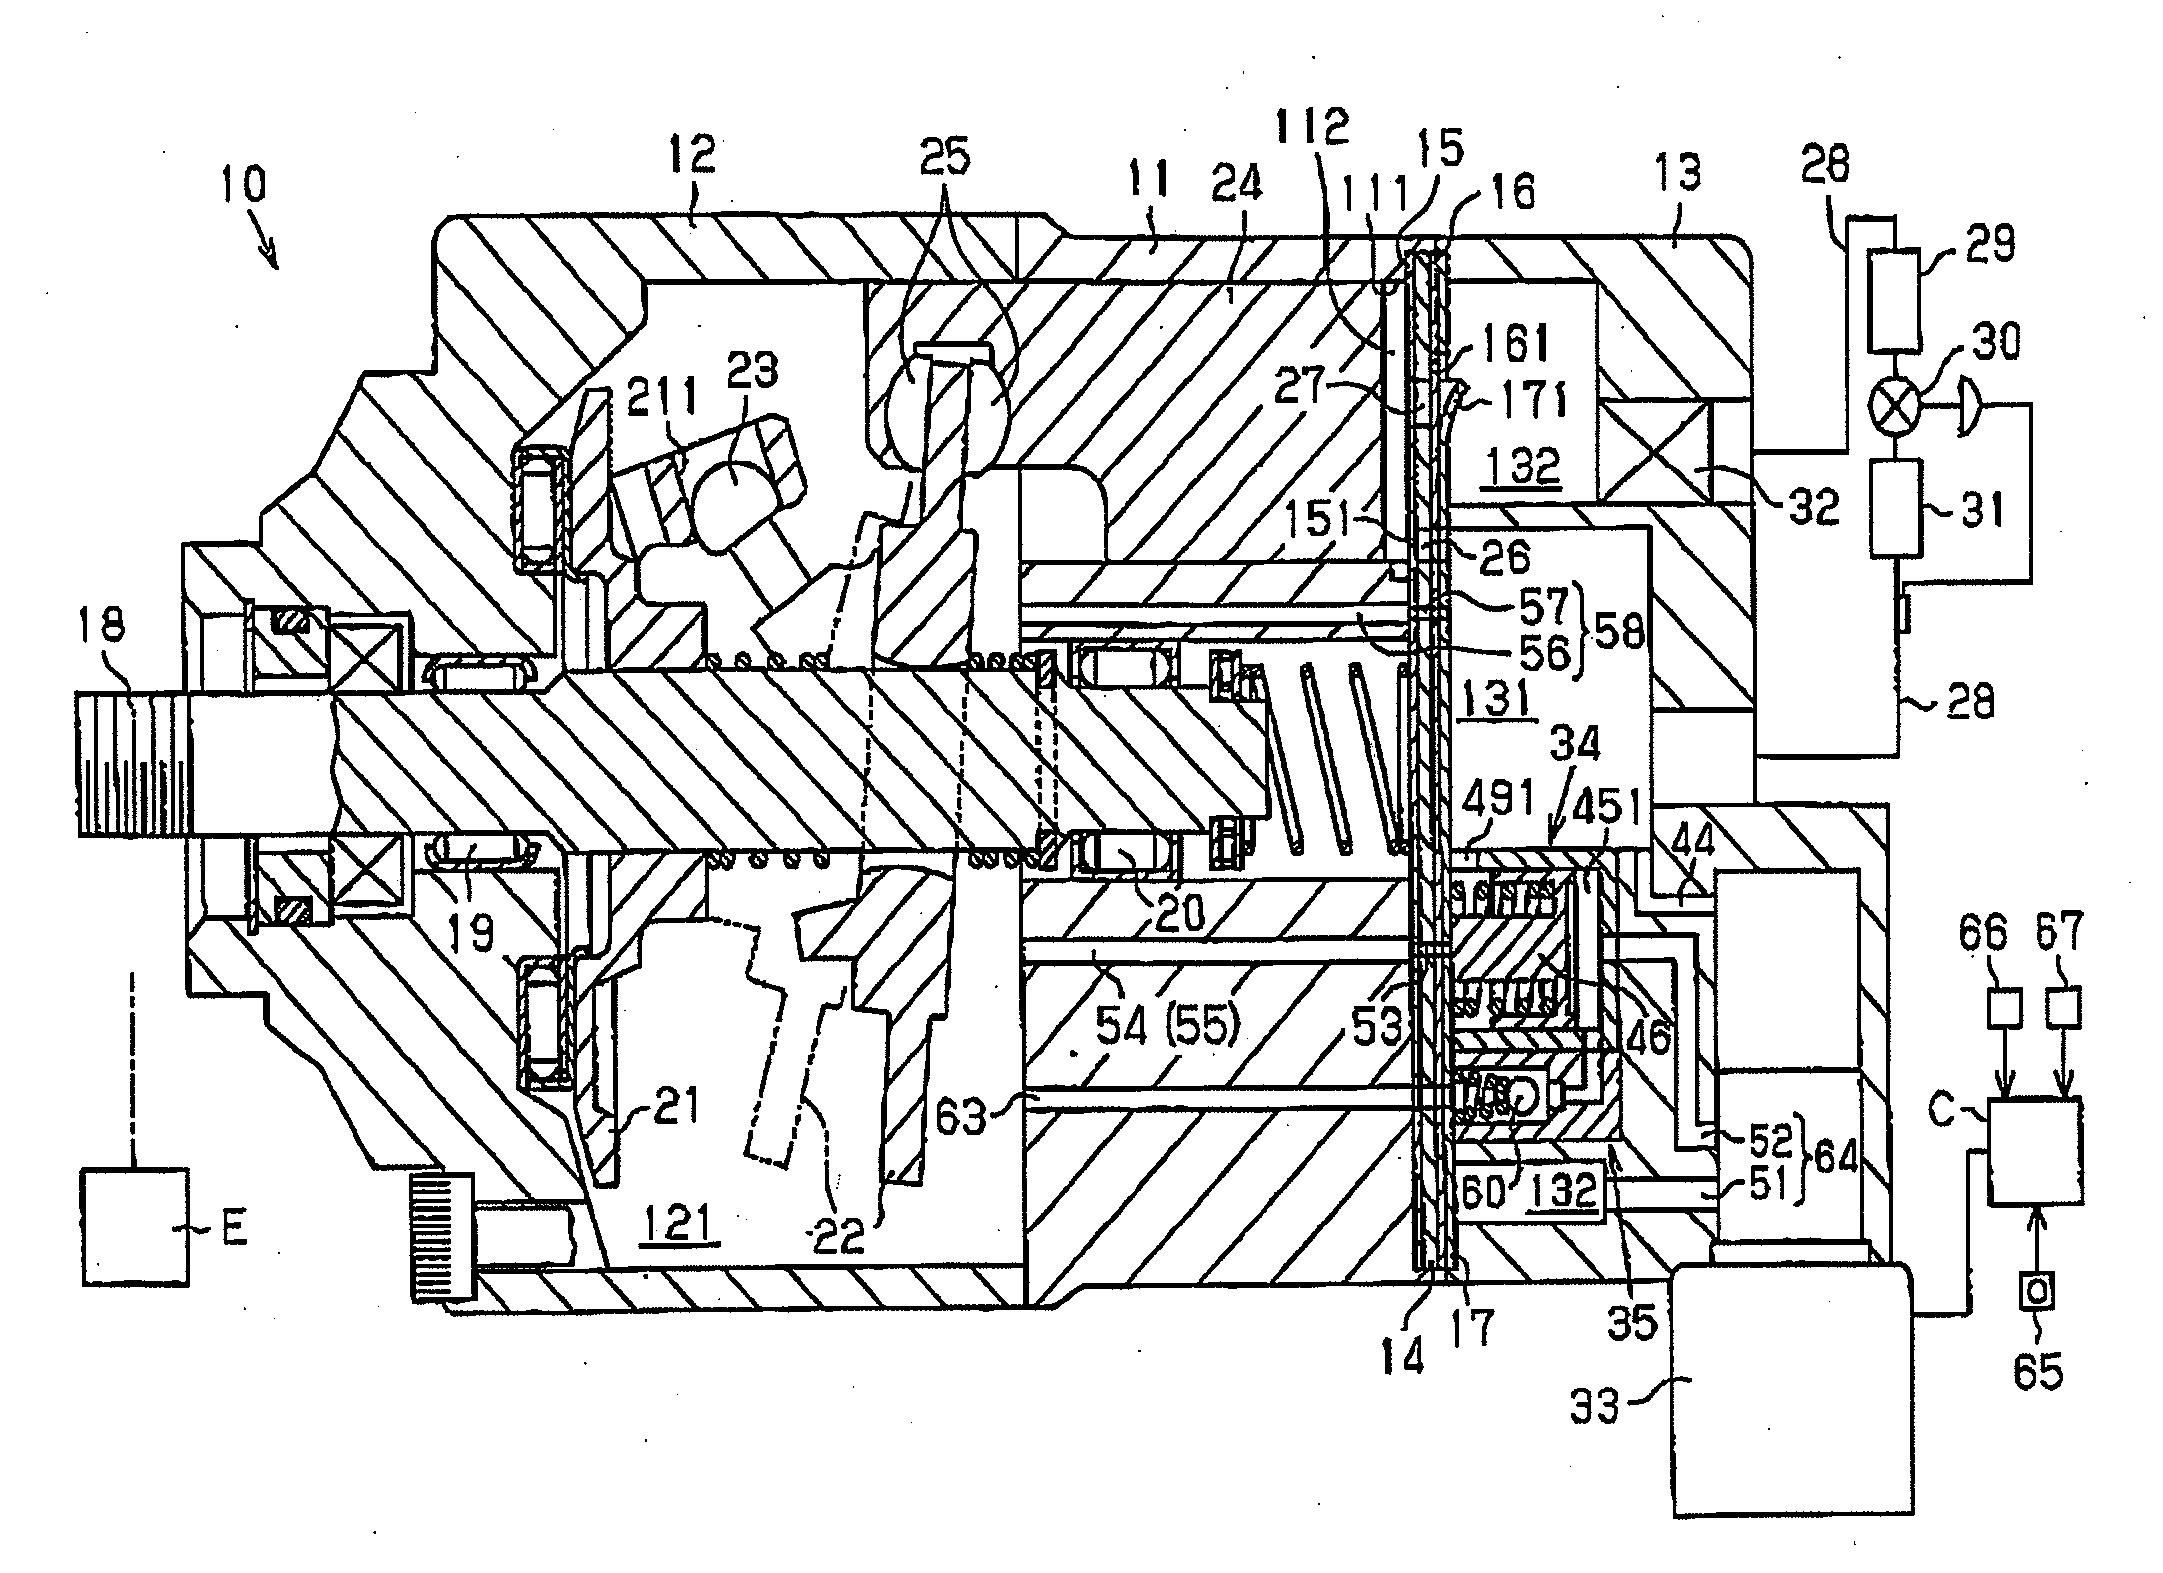 Variable displacement type compressor with displacement control mechanism